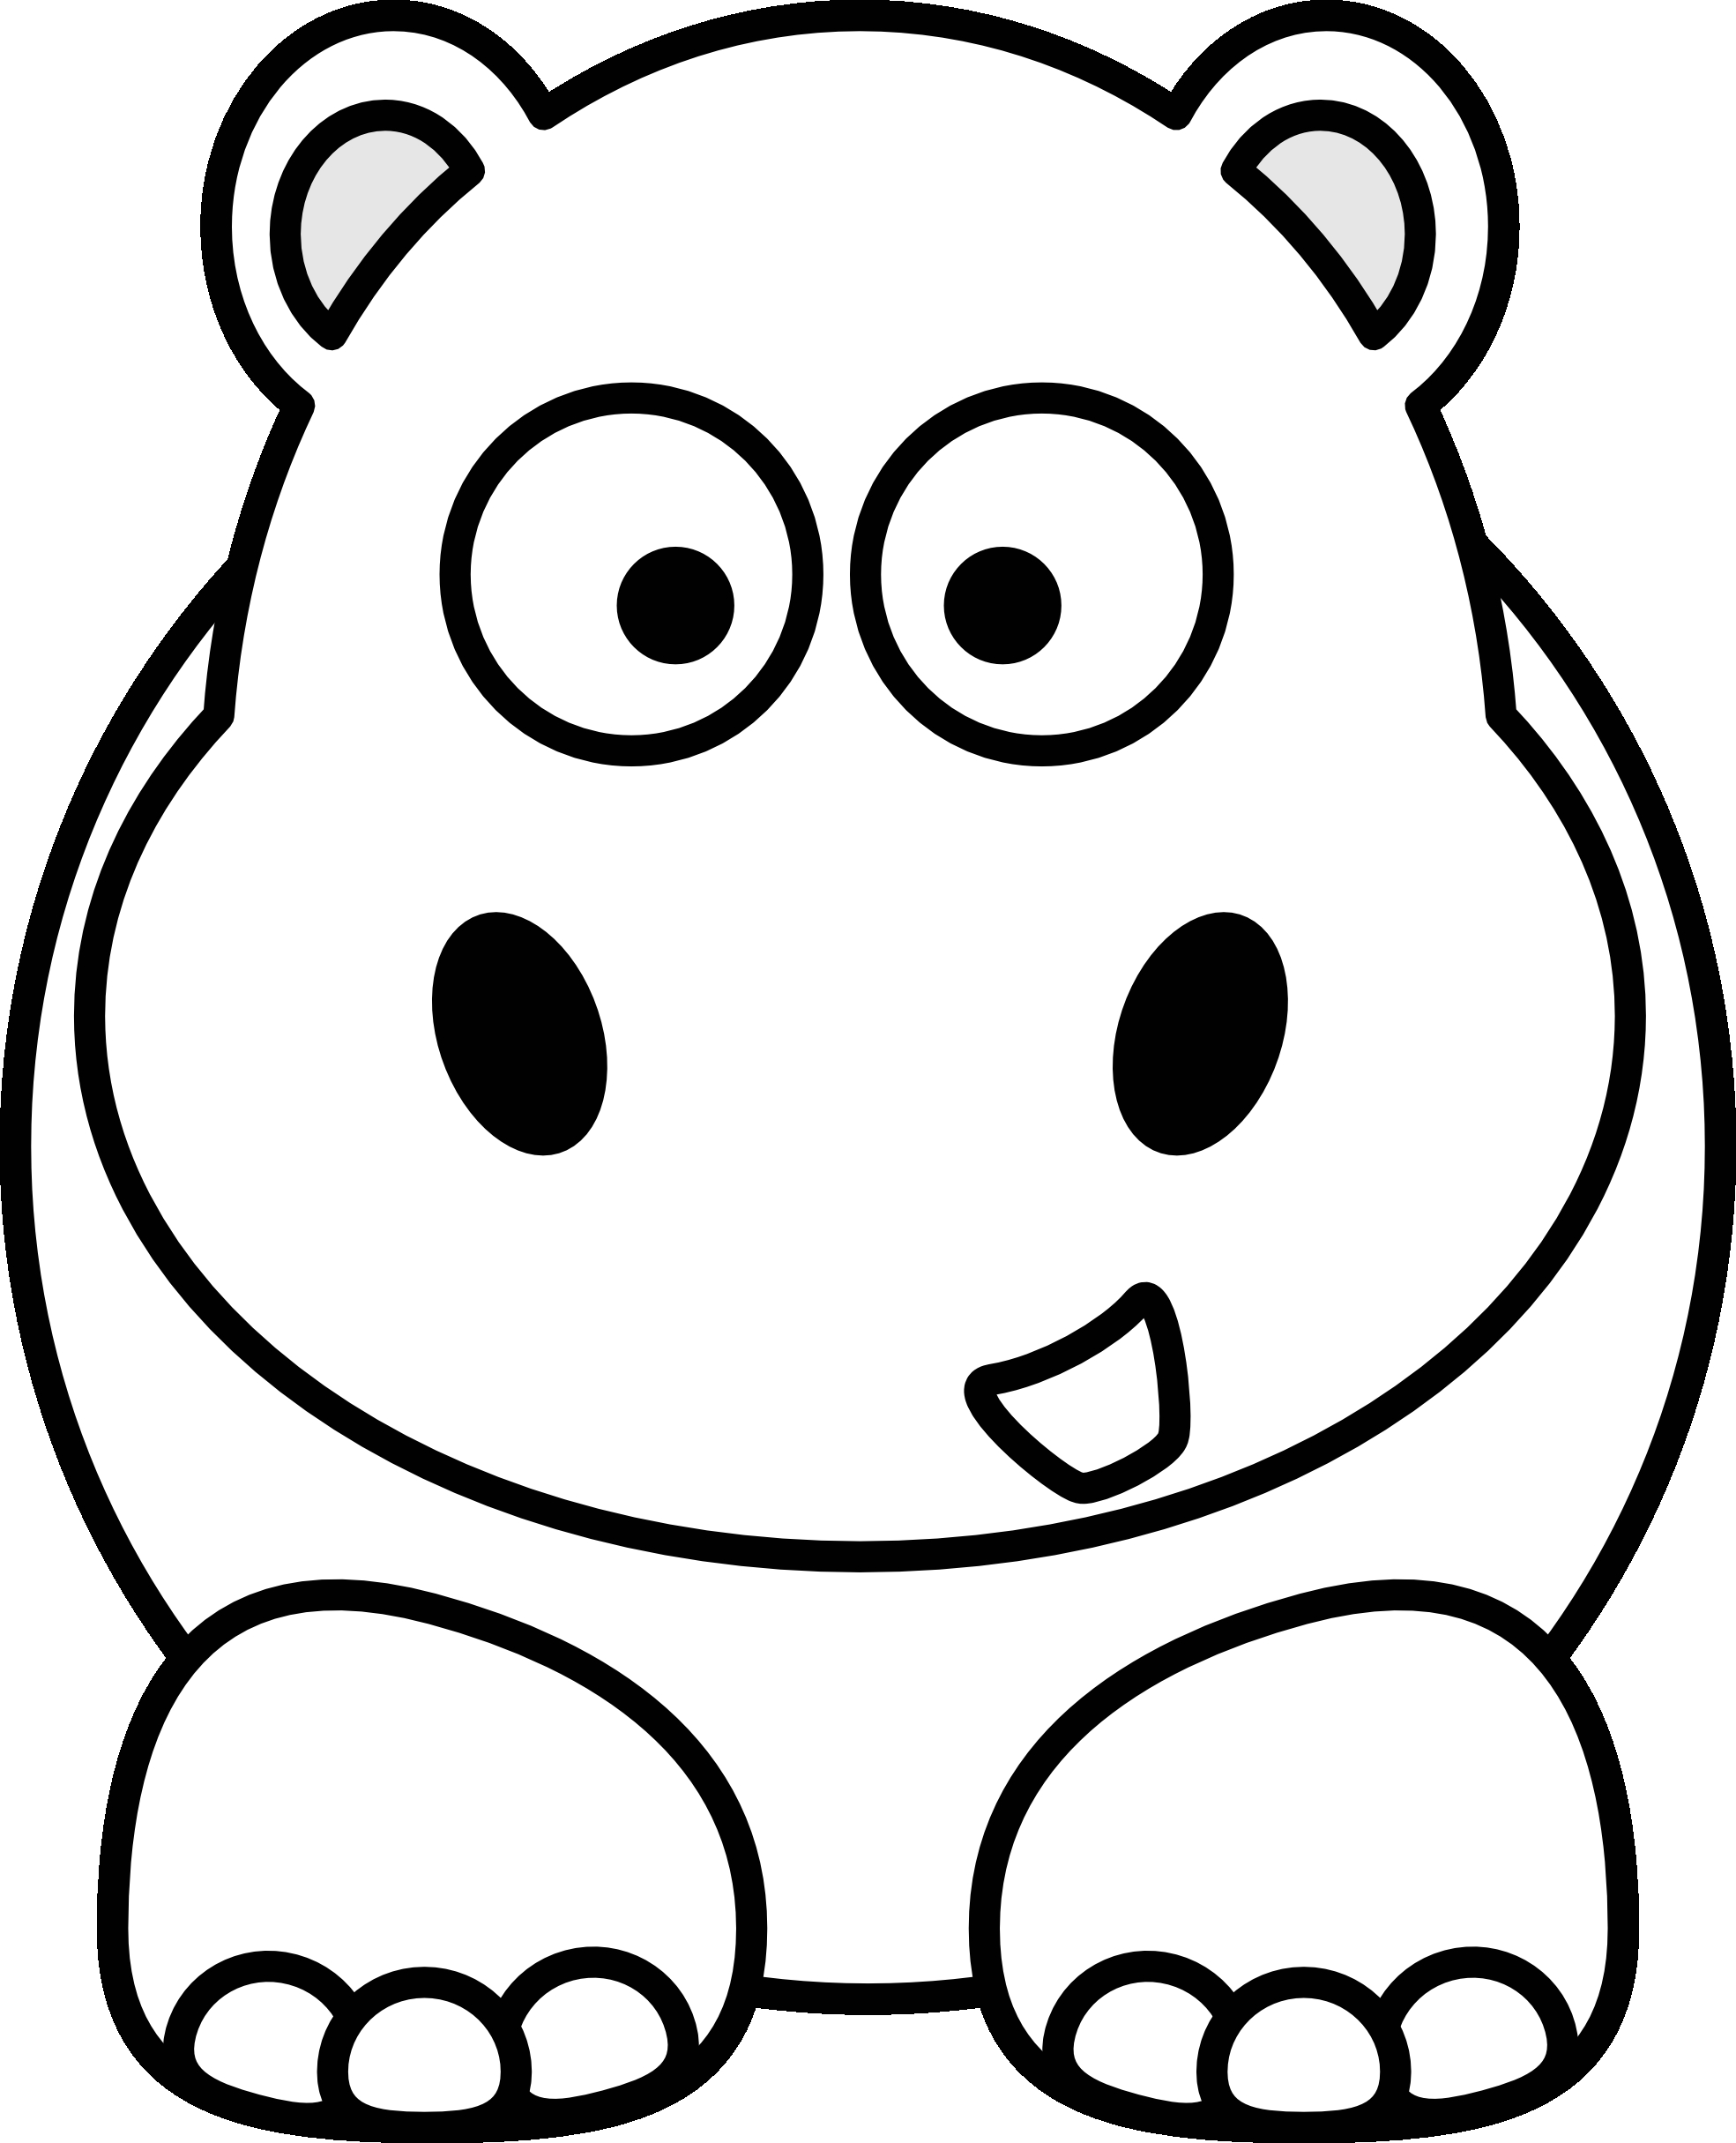 Coloring Pages Of Stuffed Animals Stuffed Animal Free Coloring Pages On Art Coloring Pages